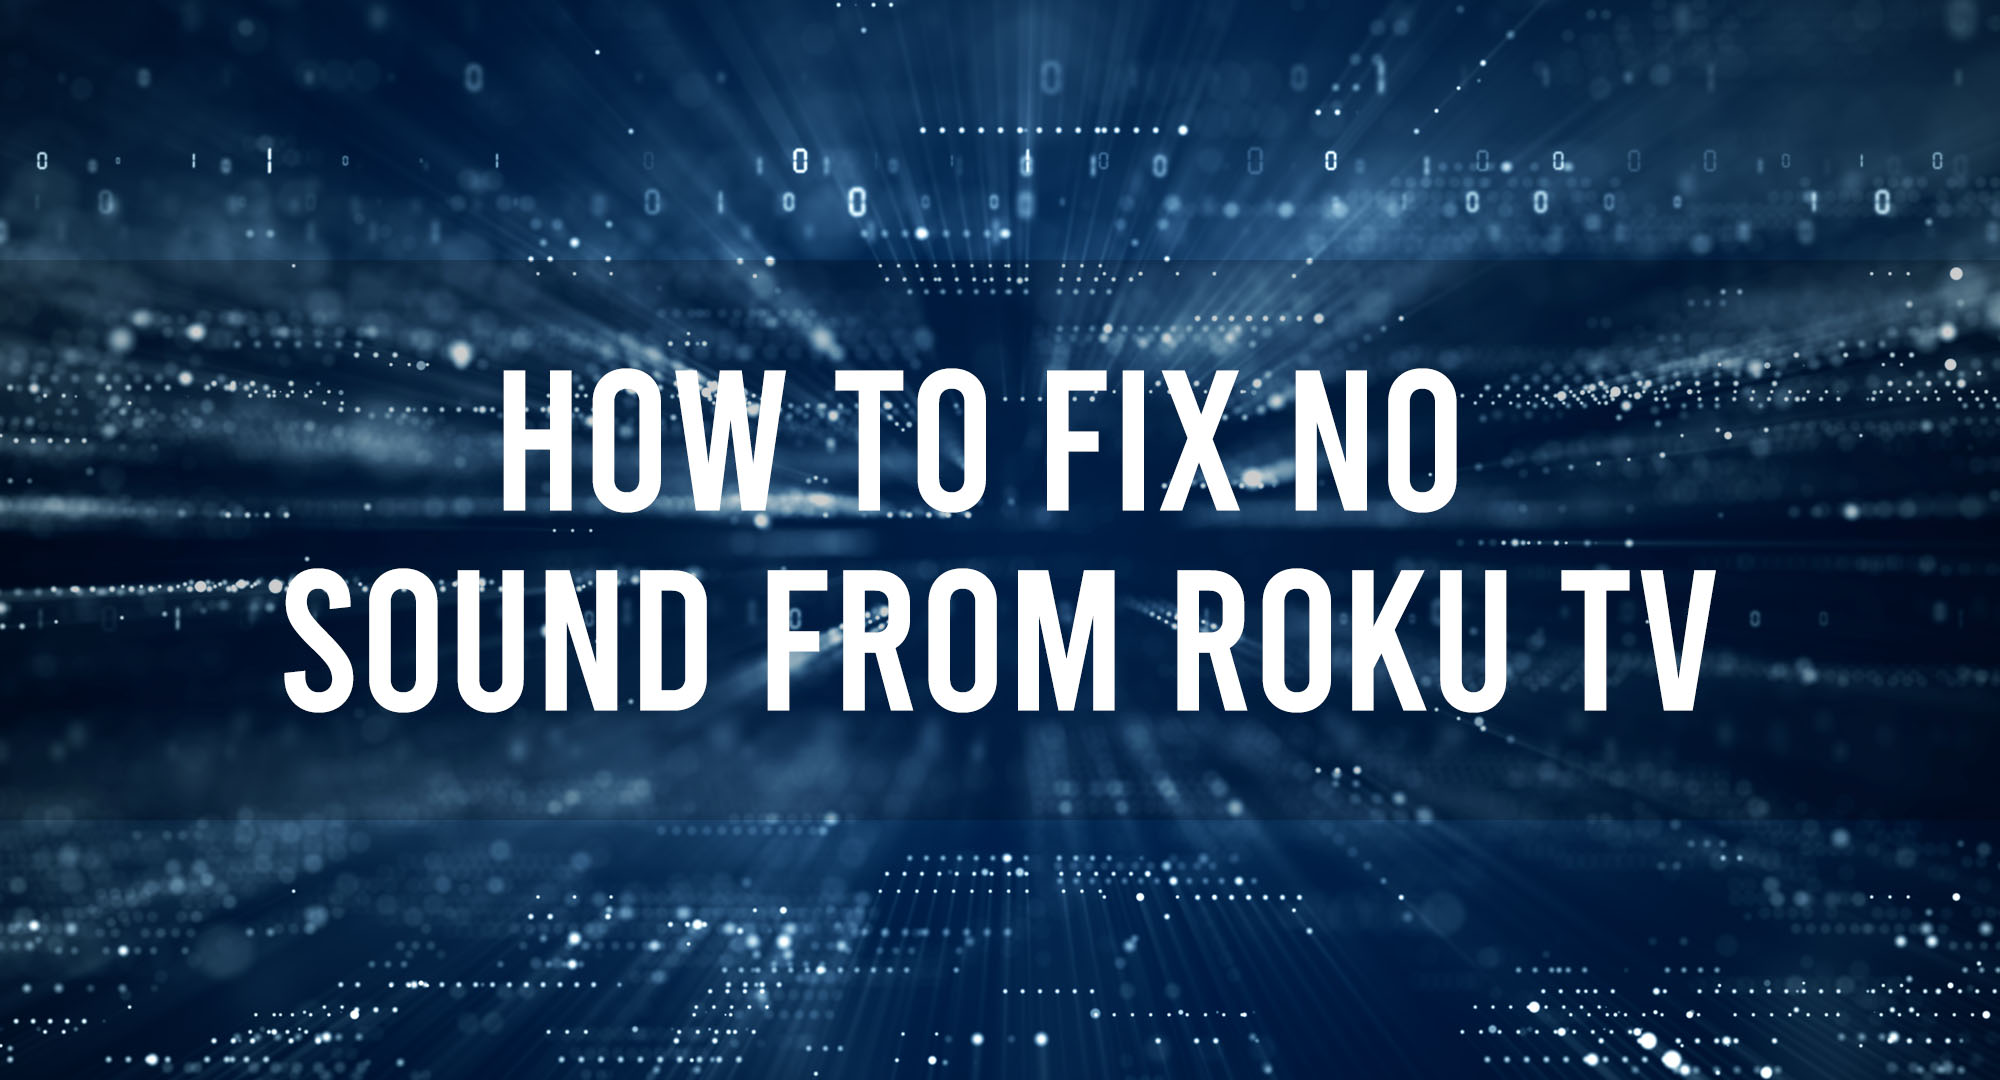 How to fix no sound from Roku TV